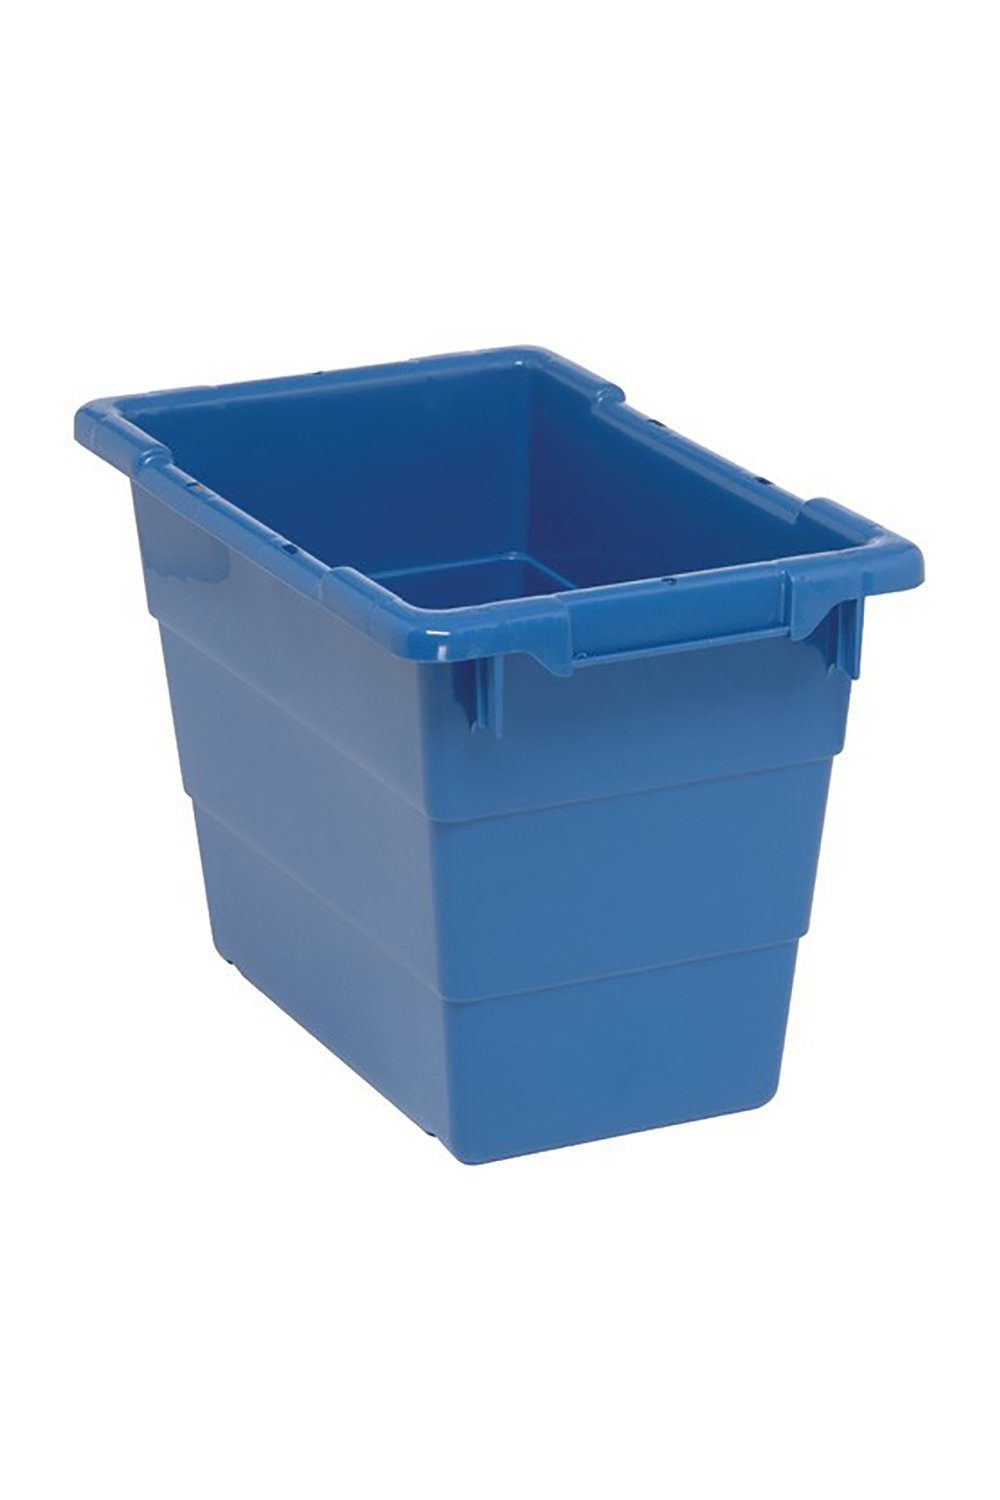 Cross Stack Tub Bins & Containers Acart 17-1/4"L x 11"W x 12"H Blue 